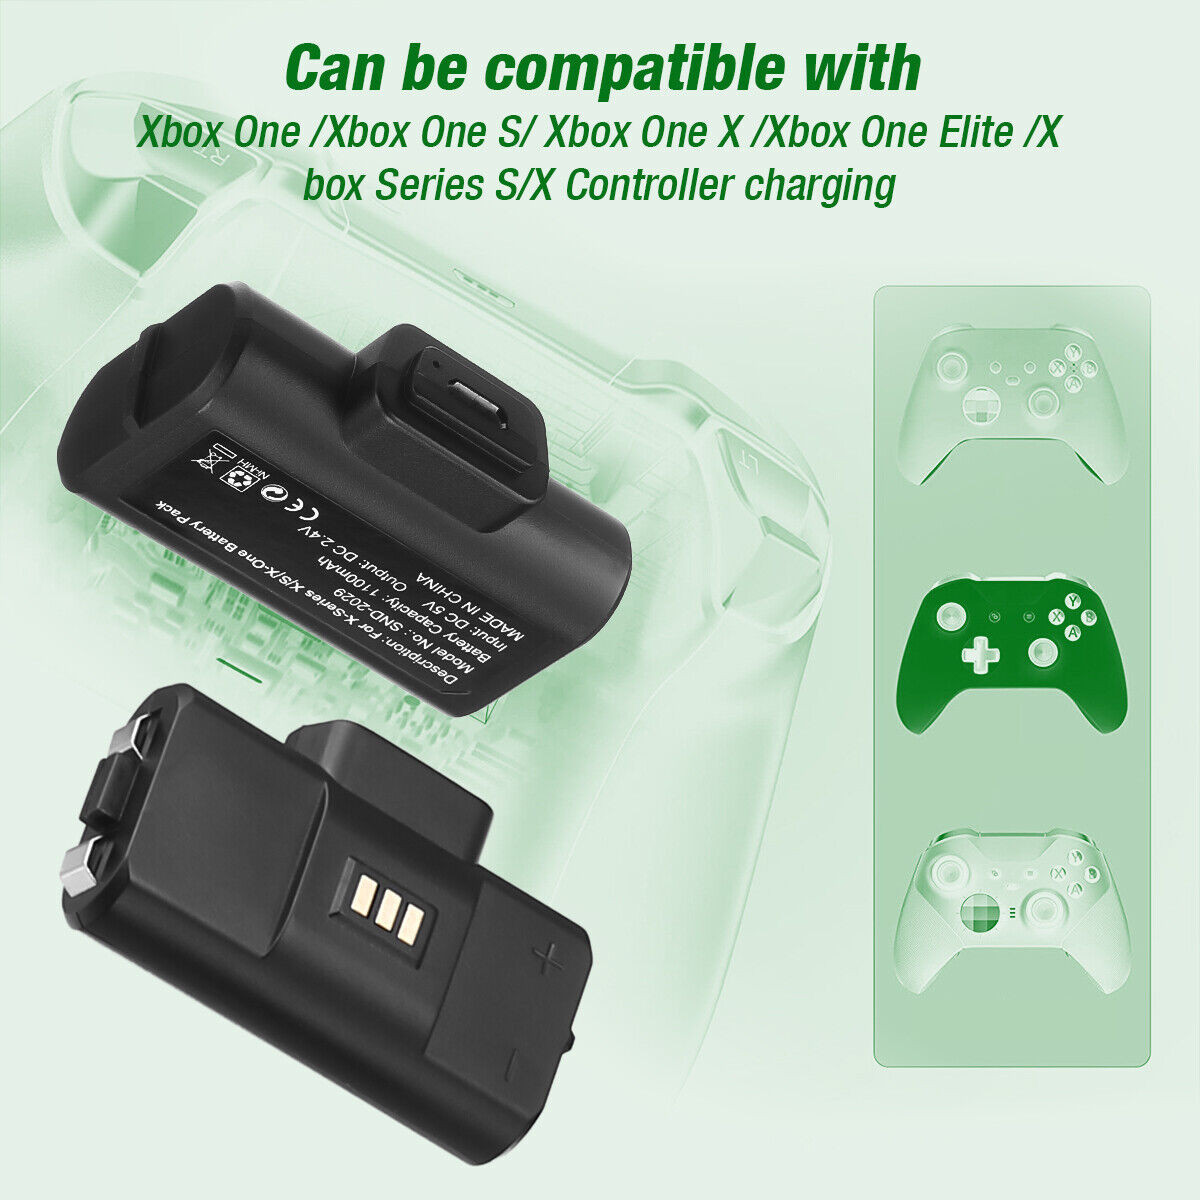 Rechargeable Battery Pack For XBox One X/S Series X/S Controller & Charger Cable EBL Does not apply - фотография #5